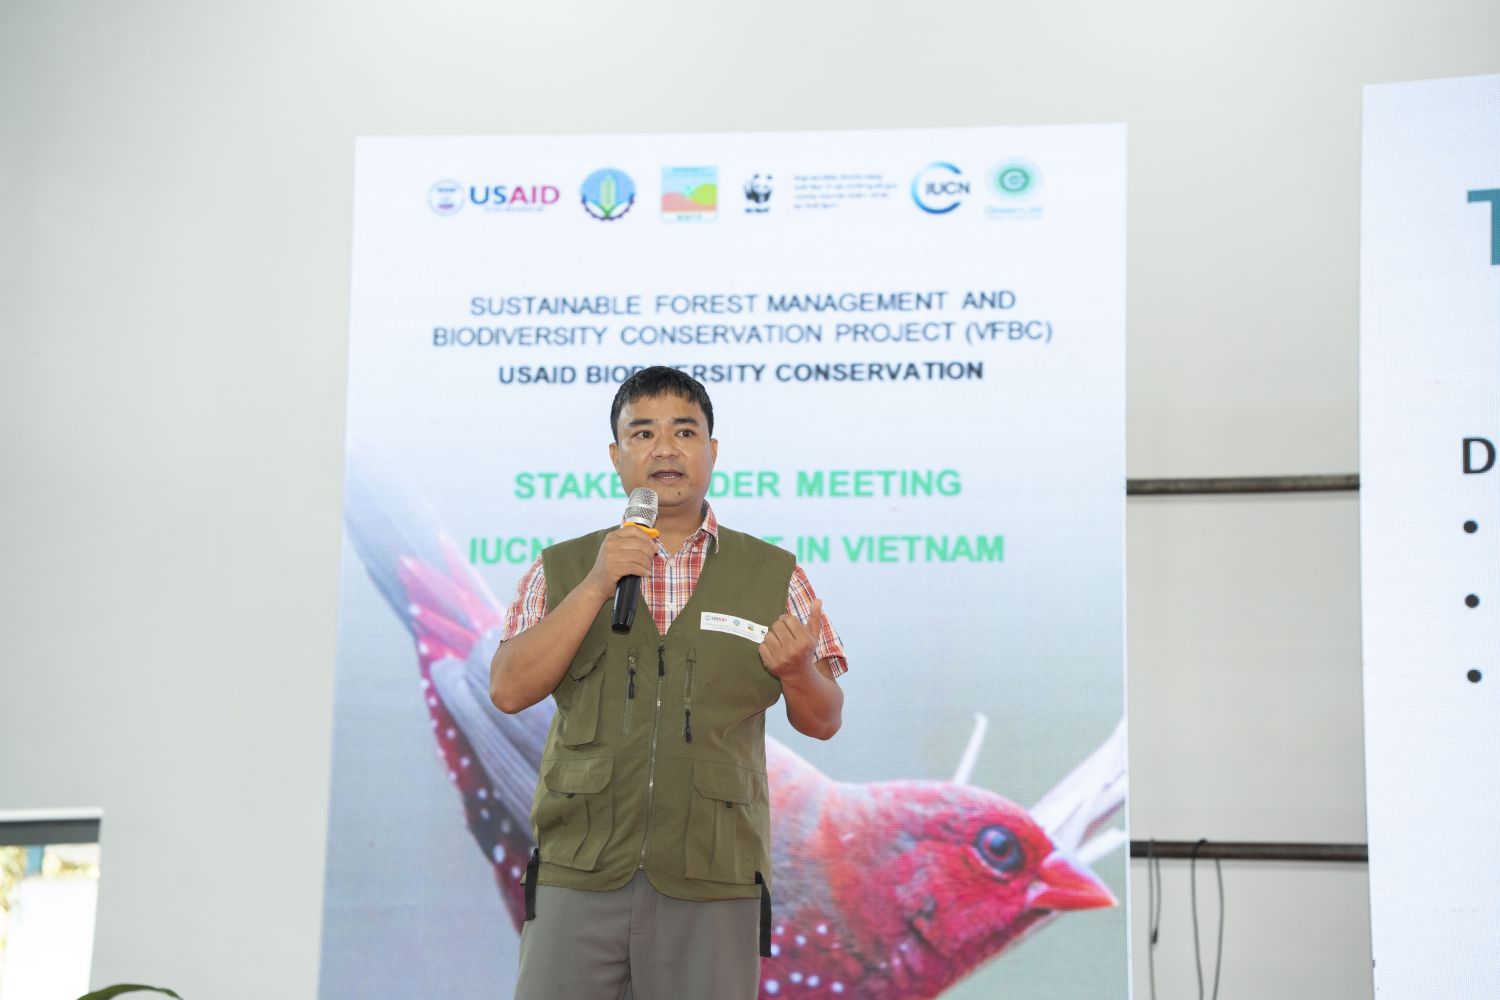 IUCN Viet Nam Biodiversity Coordinator presented about GL and its progress in Viet Nam at the meeting